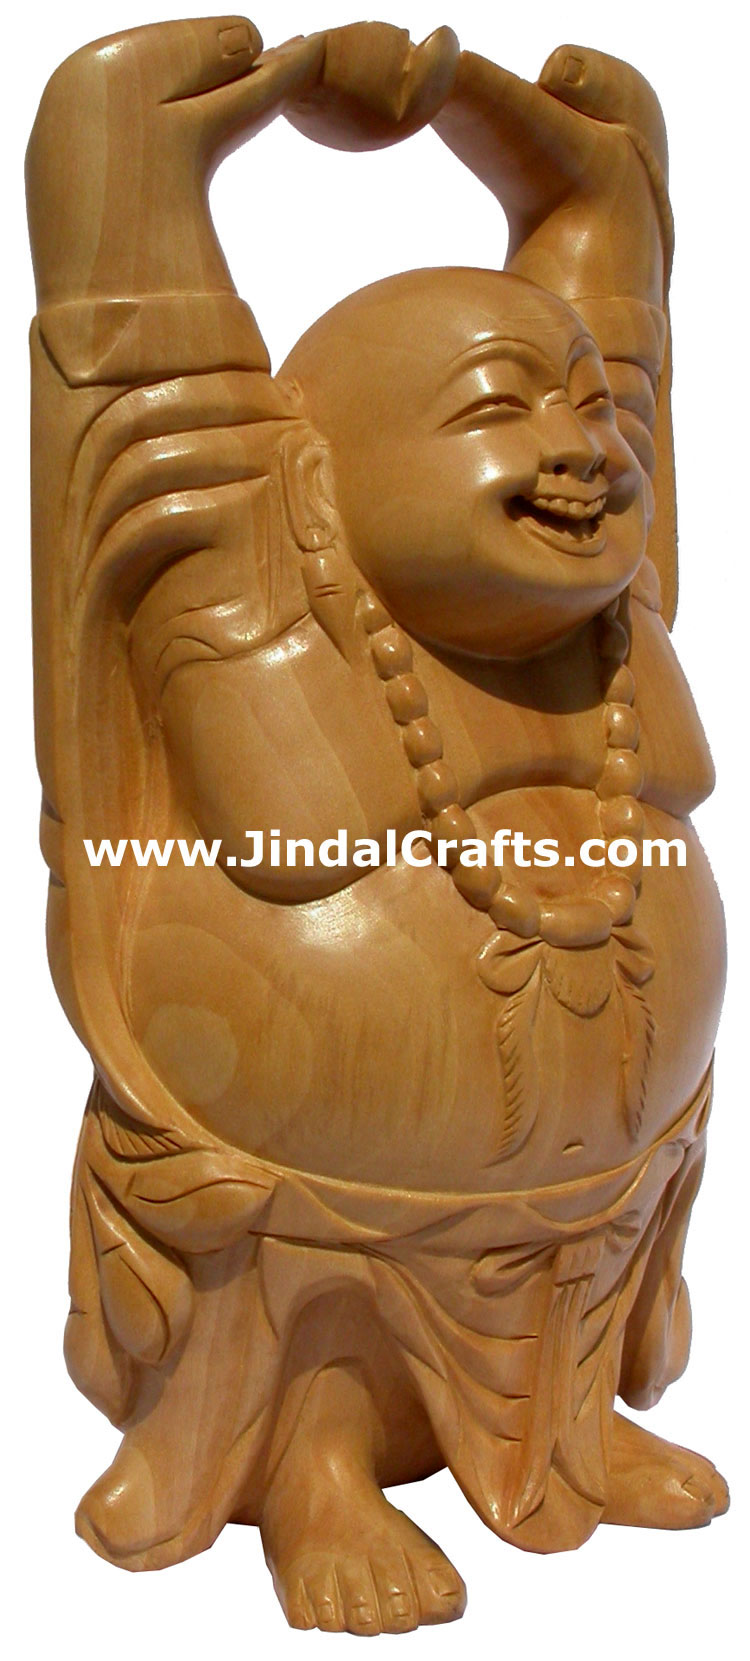 Master Piece - Handcarved Wooden Sculpture Happy Laughing Buddha Vaastu India